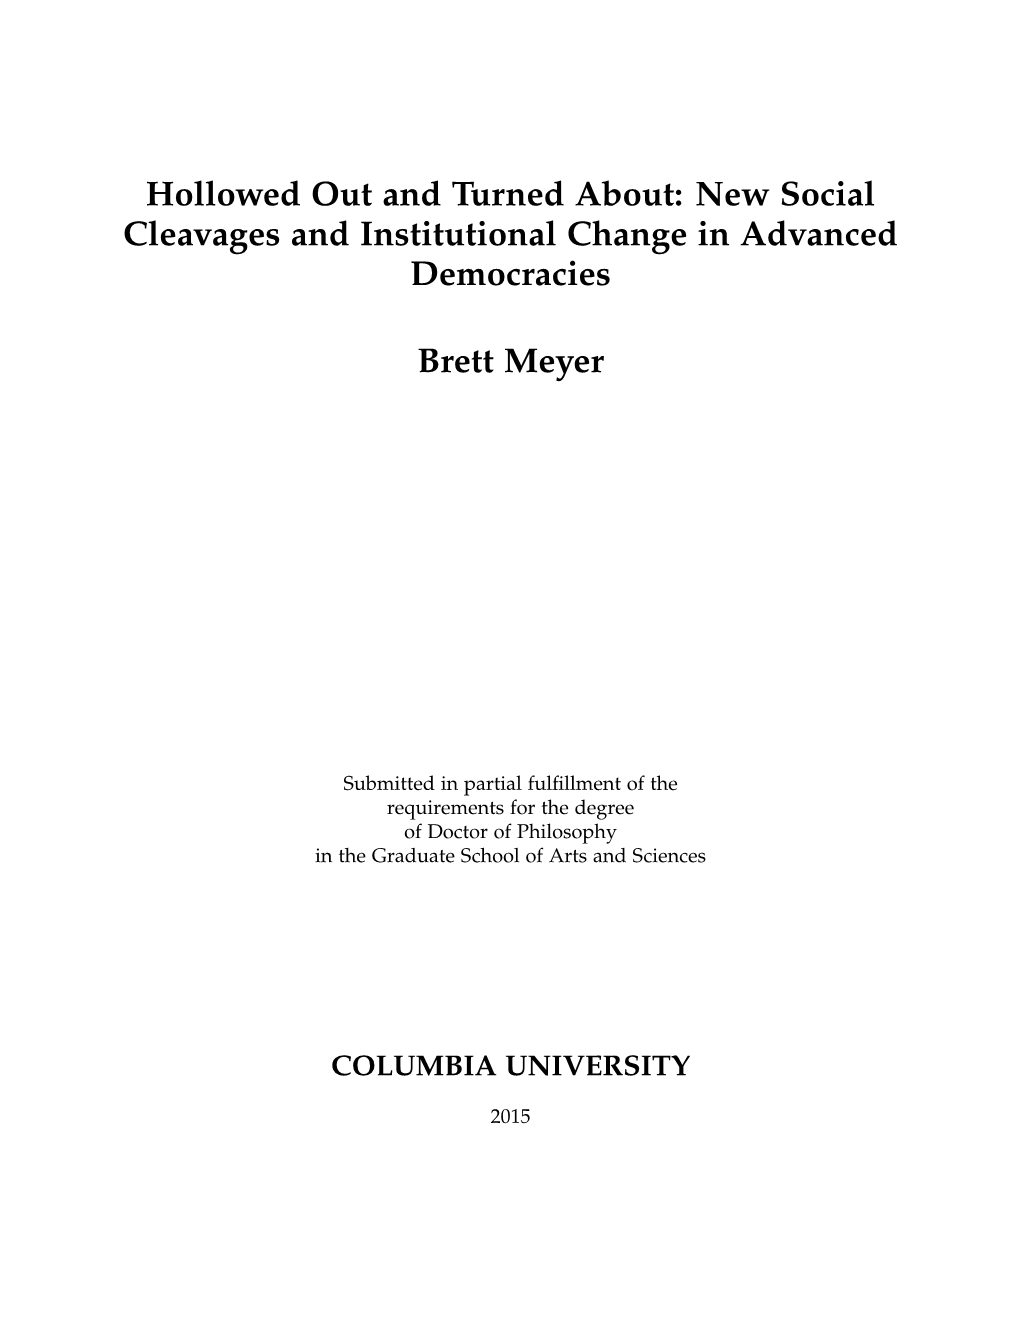 ABSTRACT Hollowed out and Turned About: New Social Cleavages and Institutional Change in Advanced Democracies Brett Meyer